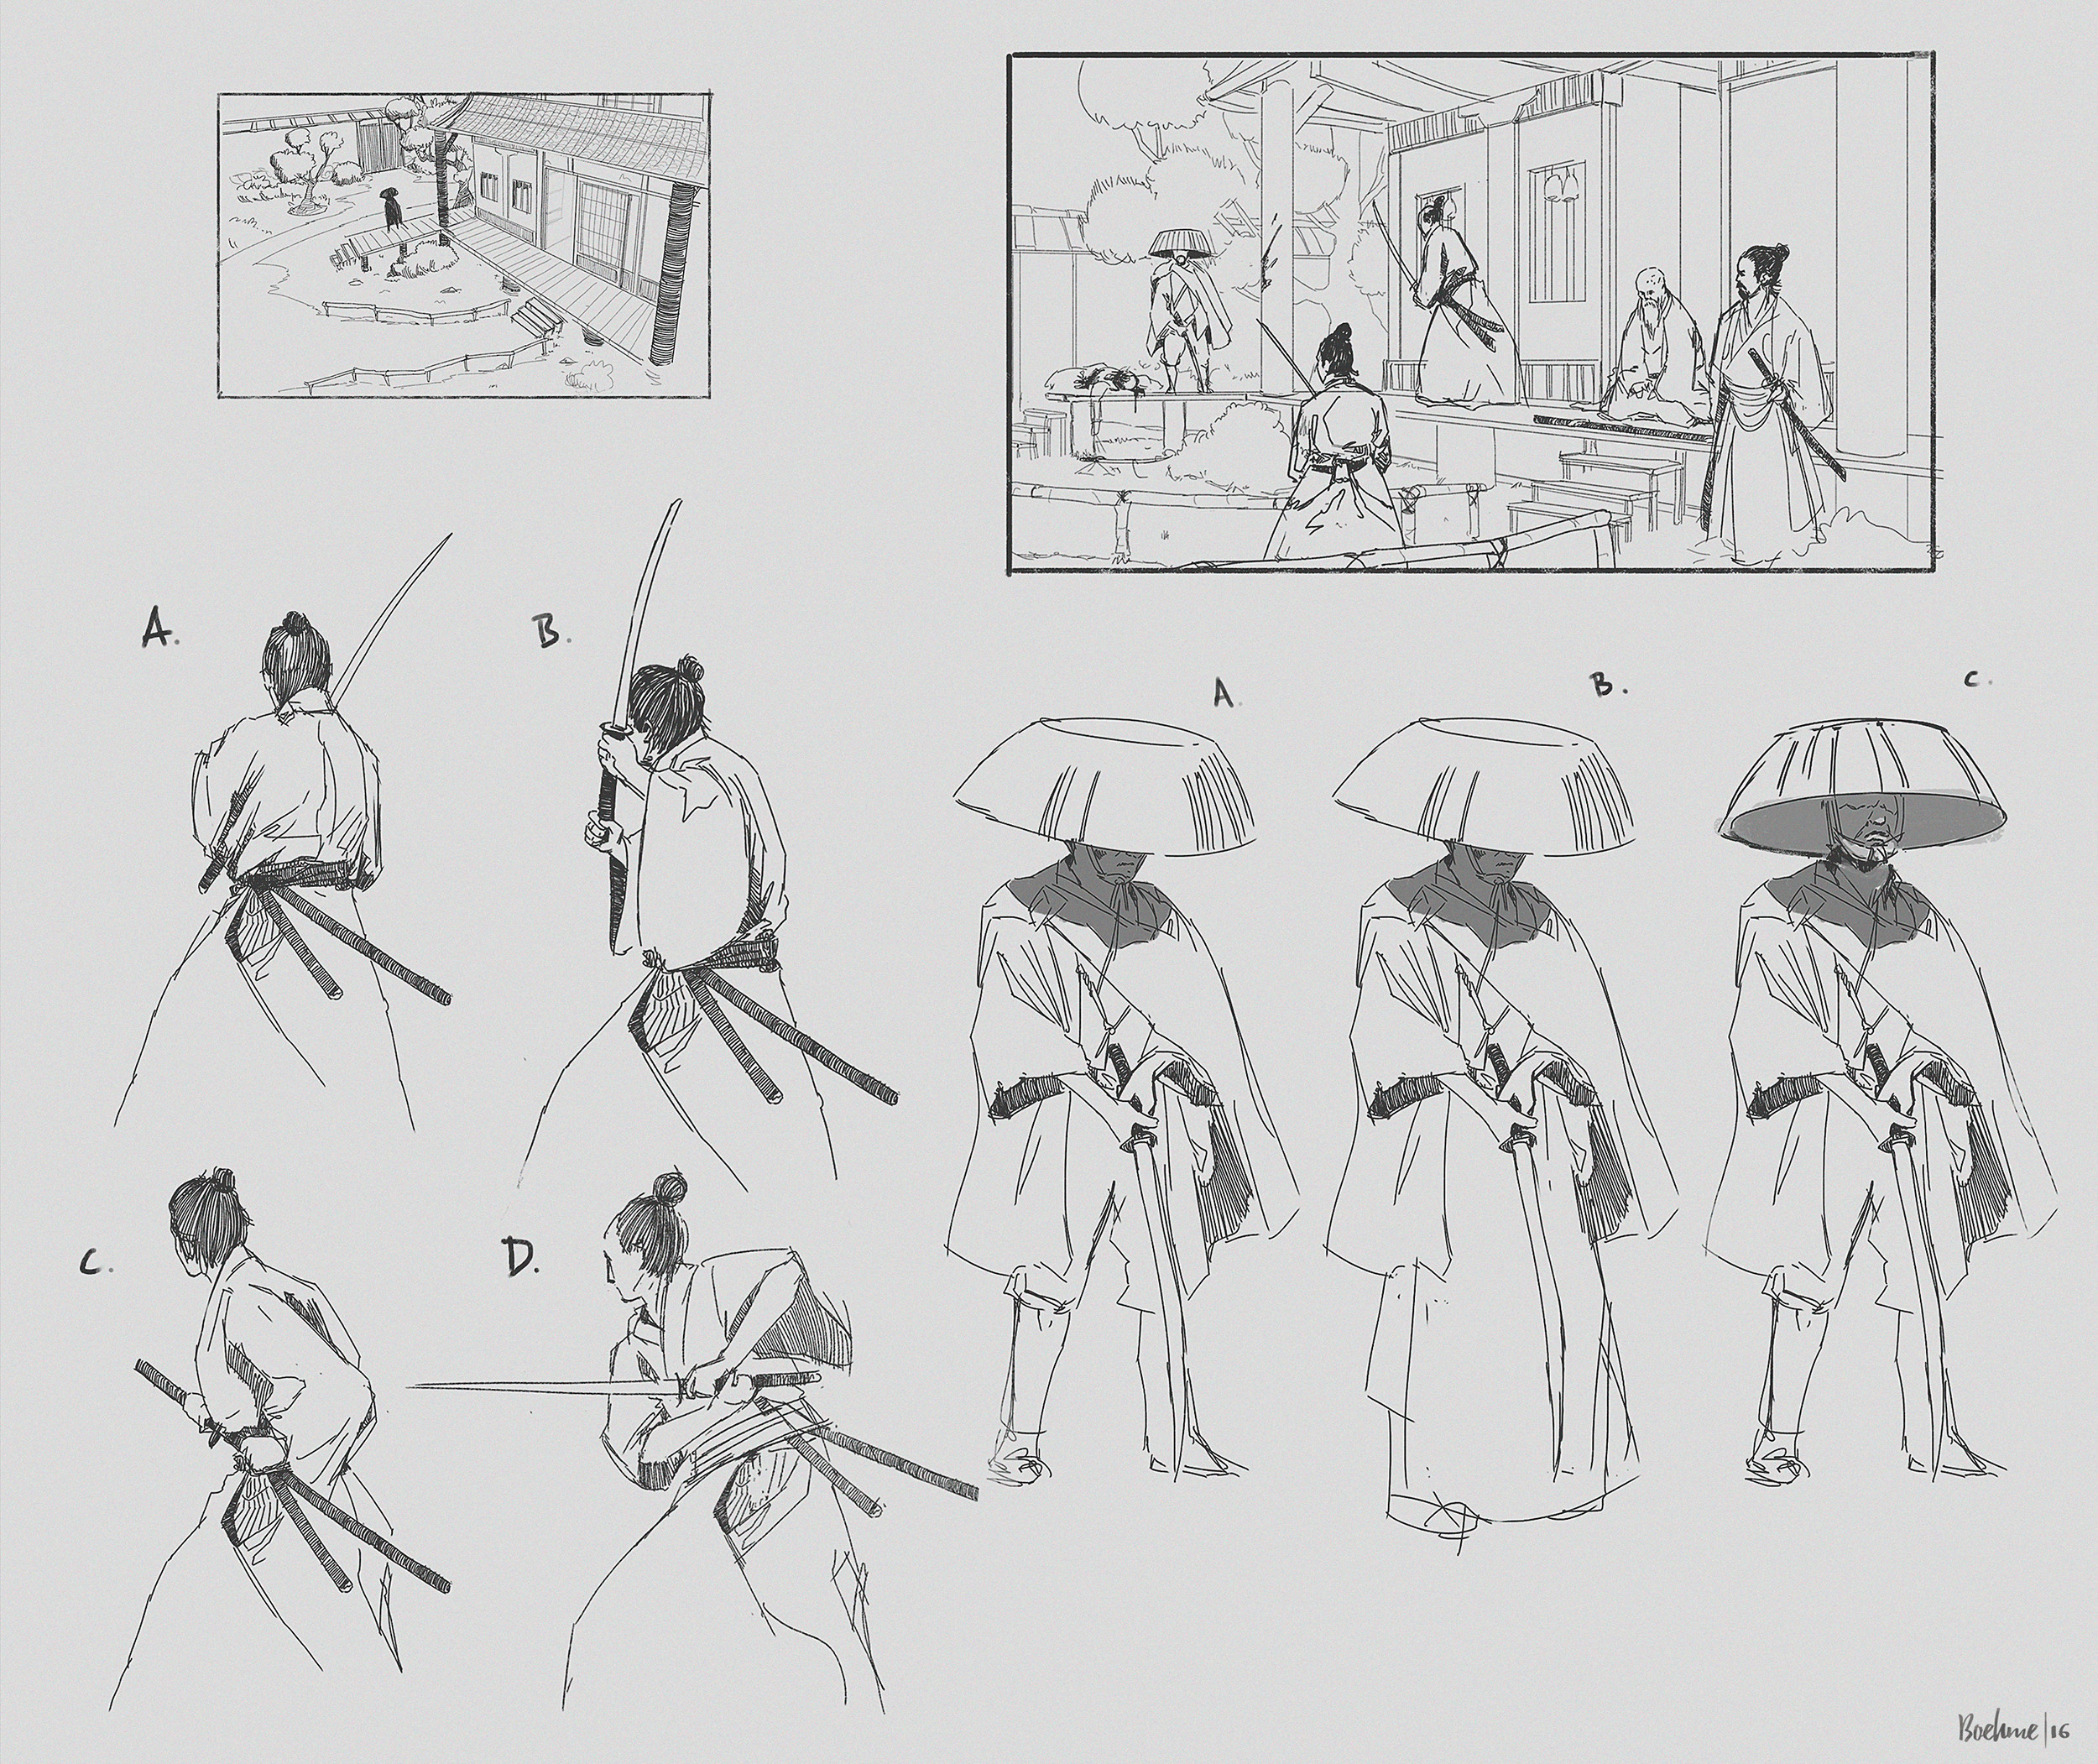 Composition and pose sketches